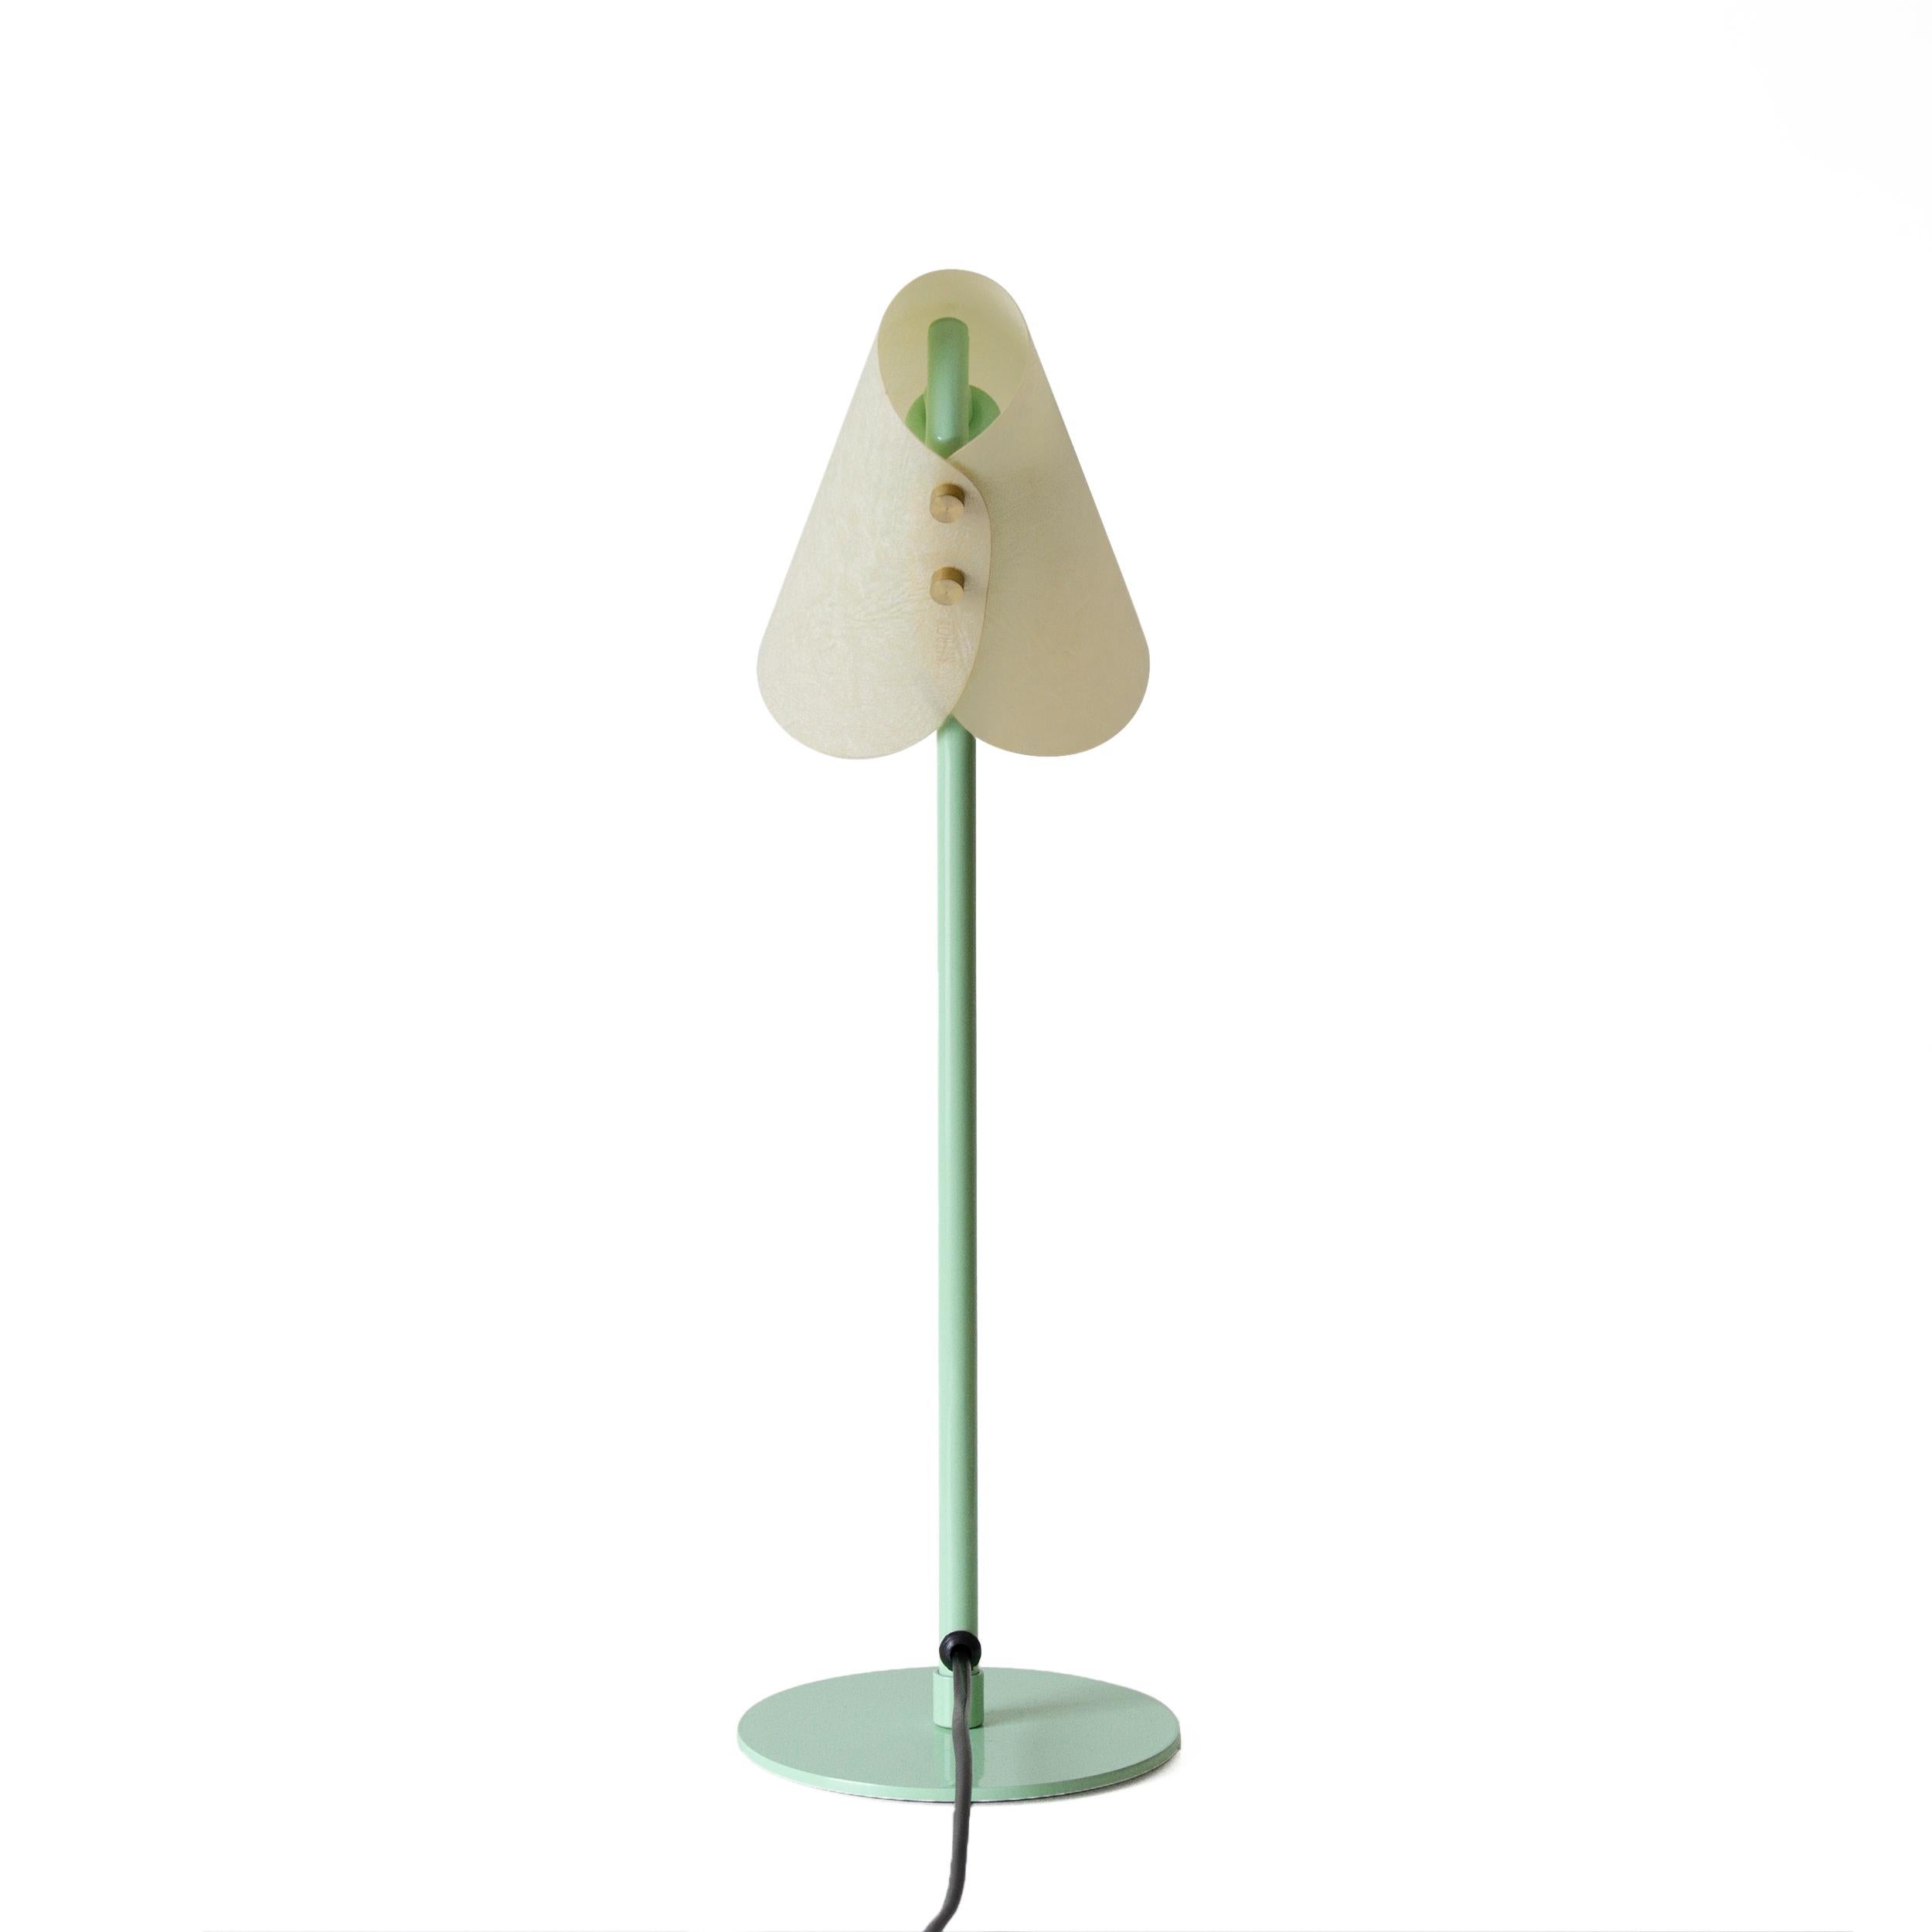 Turkish Metal & Parchment Desk Lamp, Mint Green, June, Inspired by Handmaid's Tale